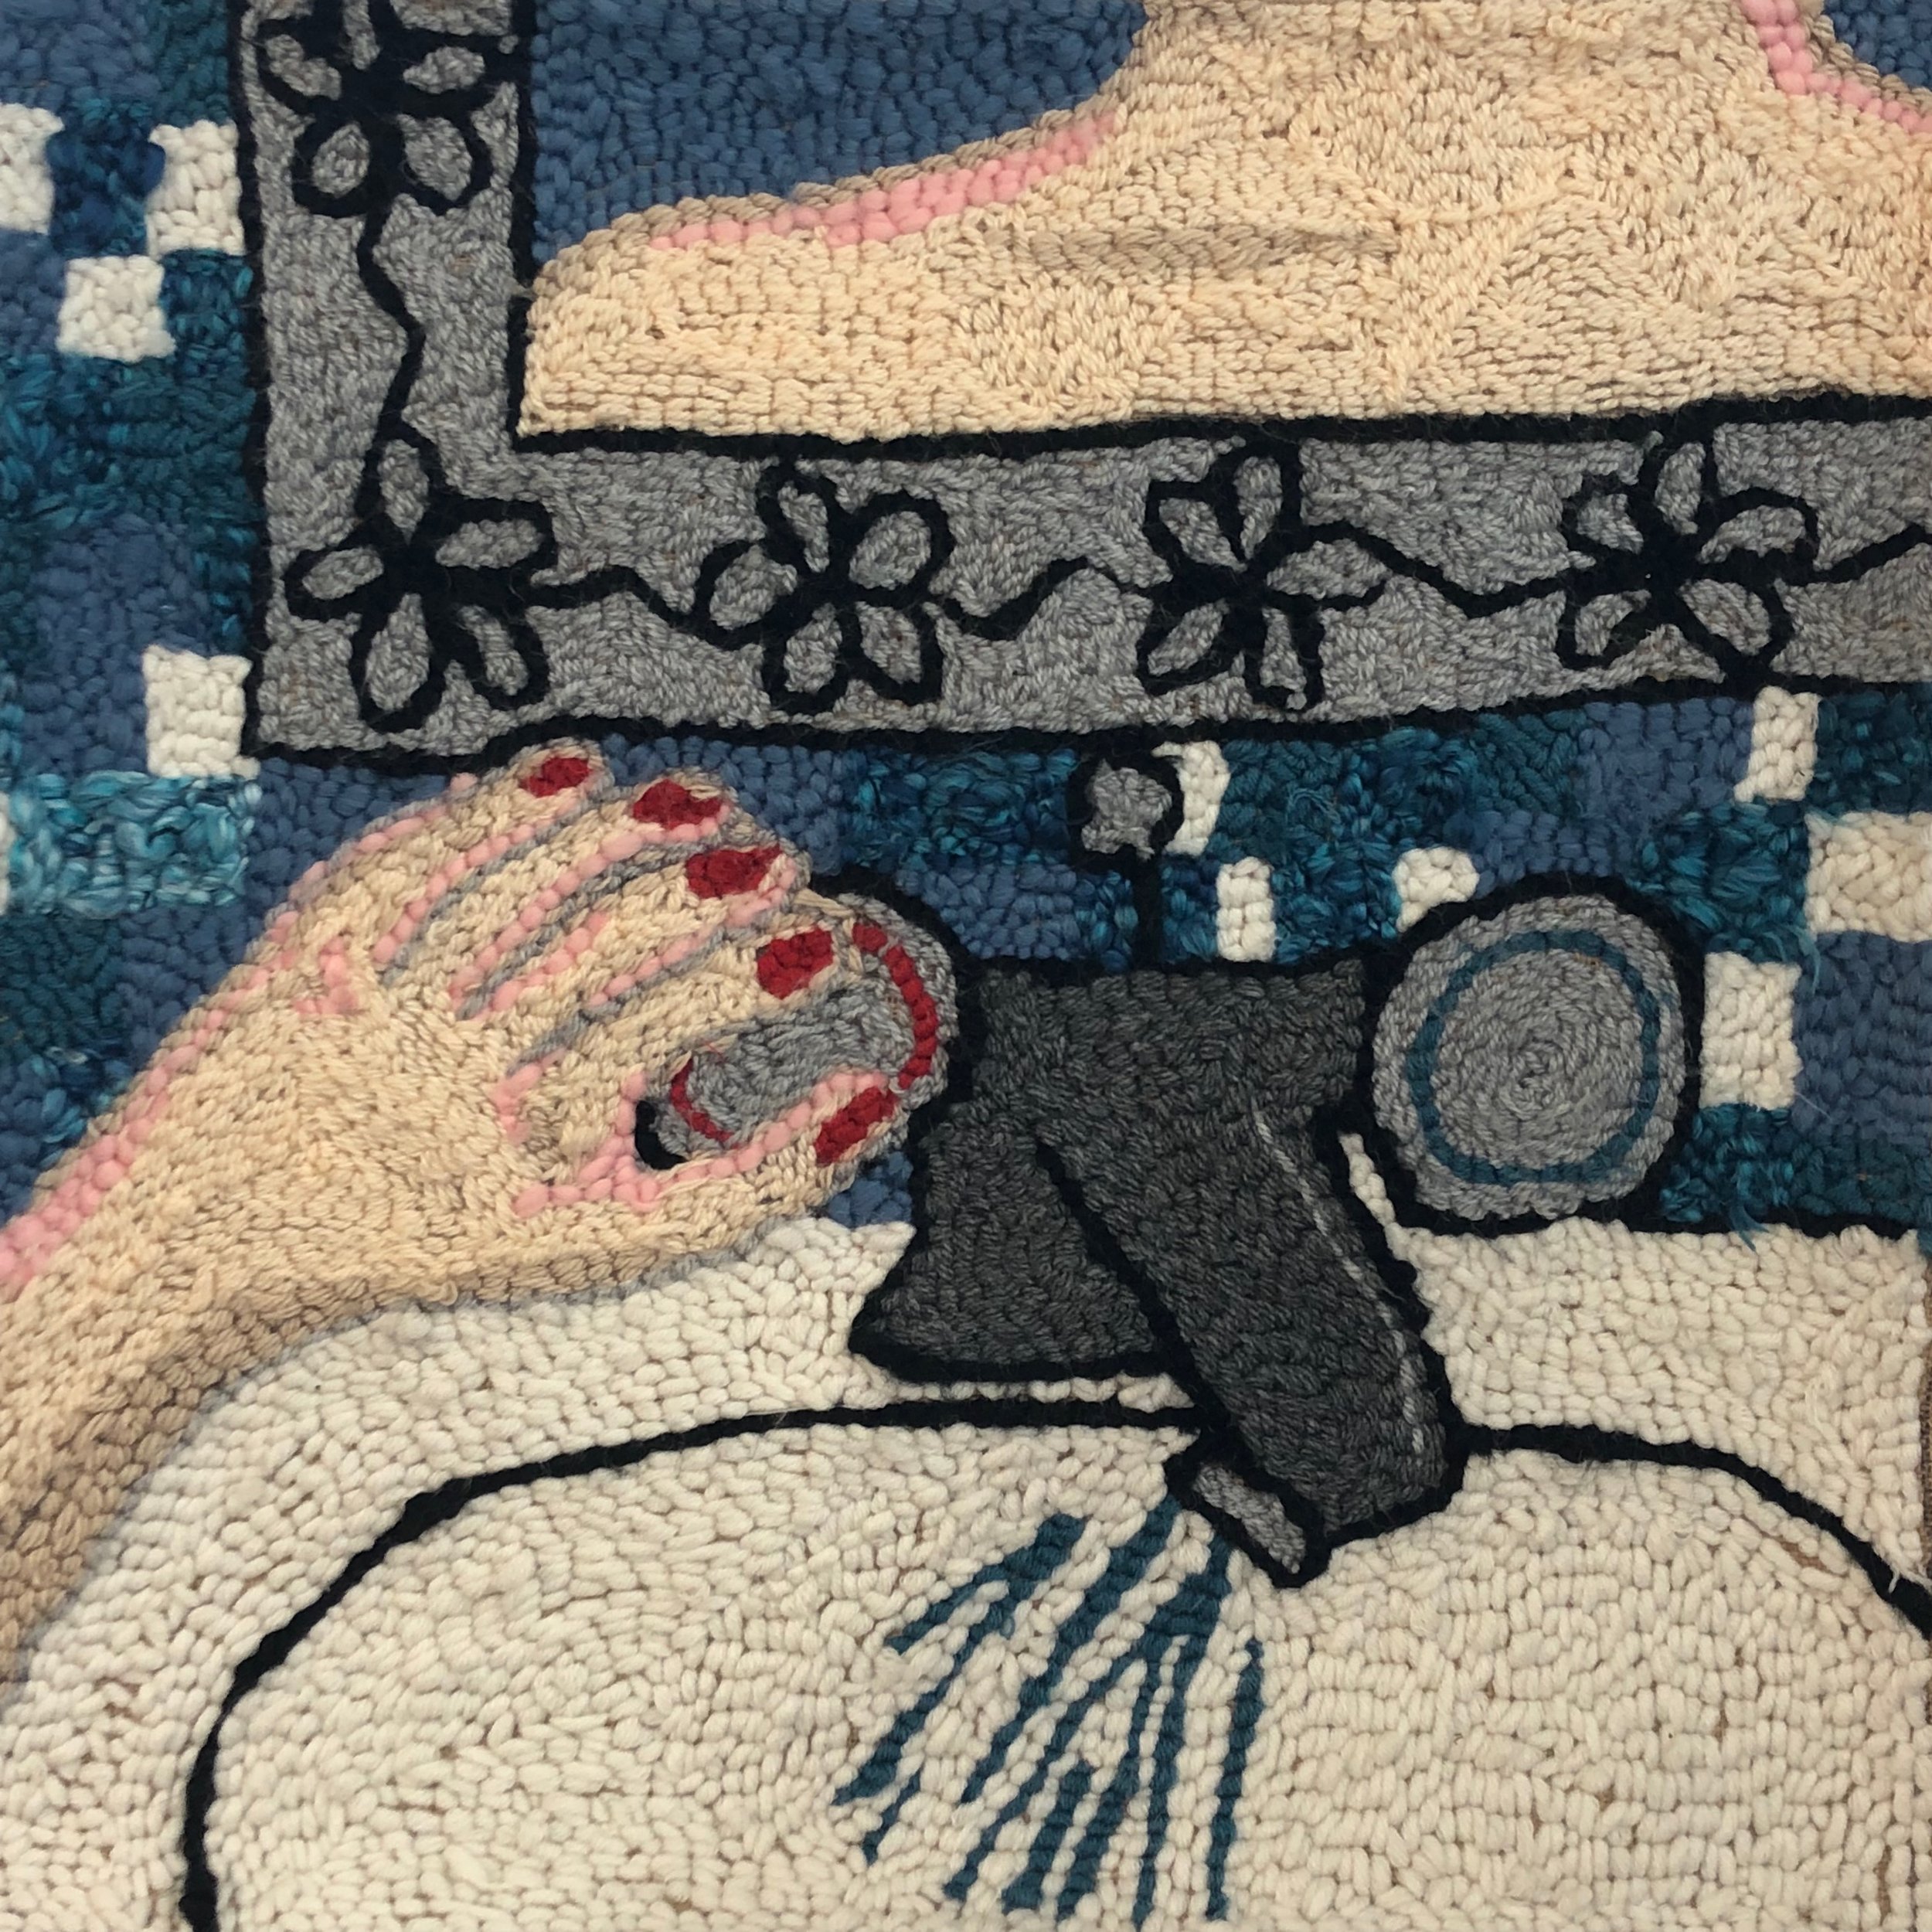 Nails in the sink’, 2019, 60 x 60cm, Hessian, wool